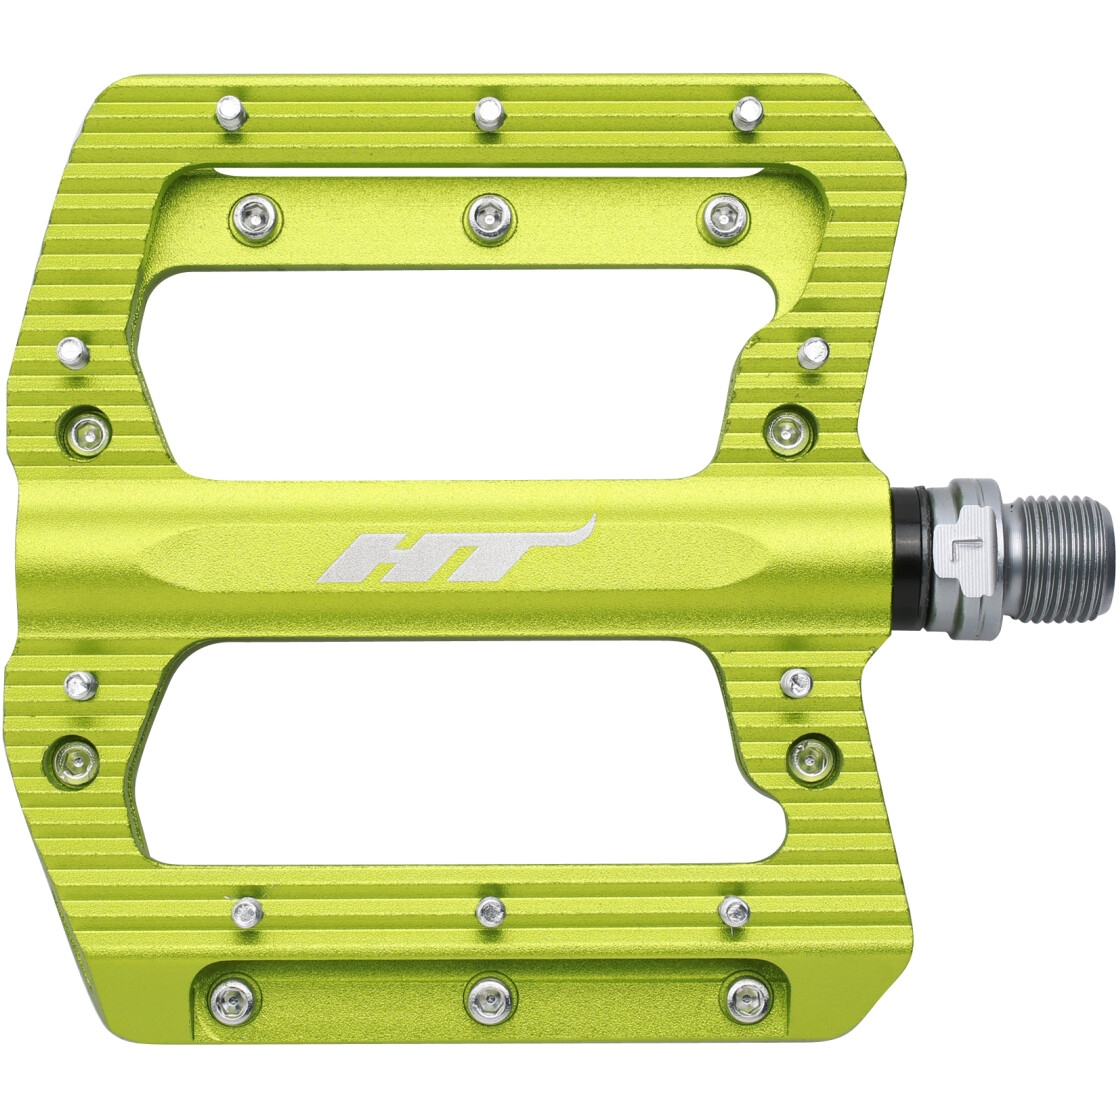 Picture of HT ANS01 NANO Flat Pedal - apple green